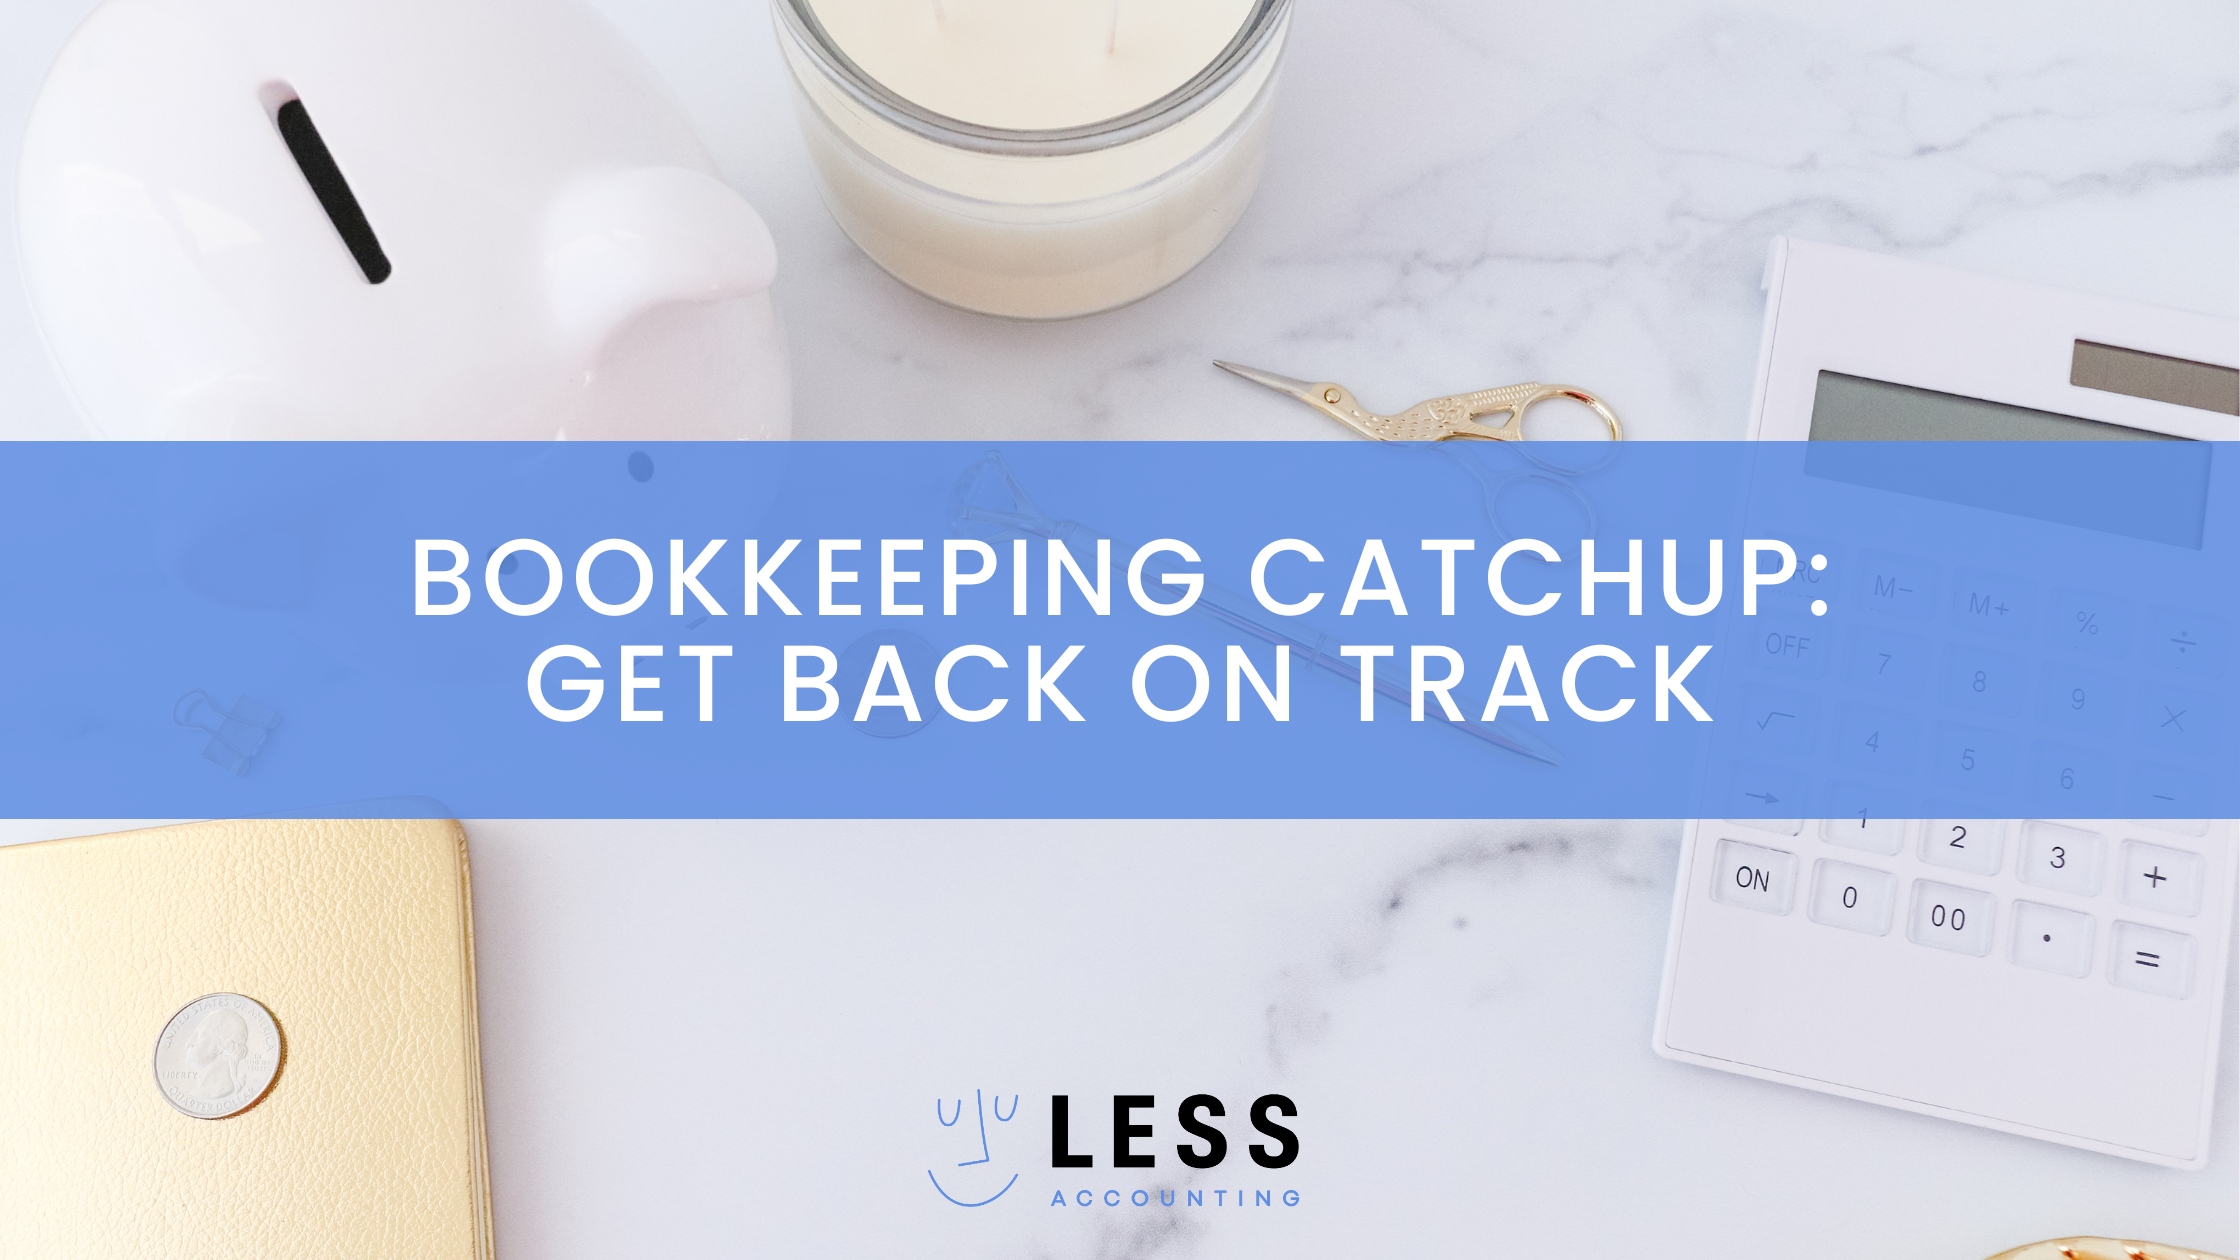 Bookkeeping Catchup, tips to get back on track